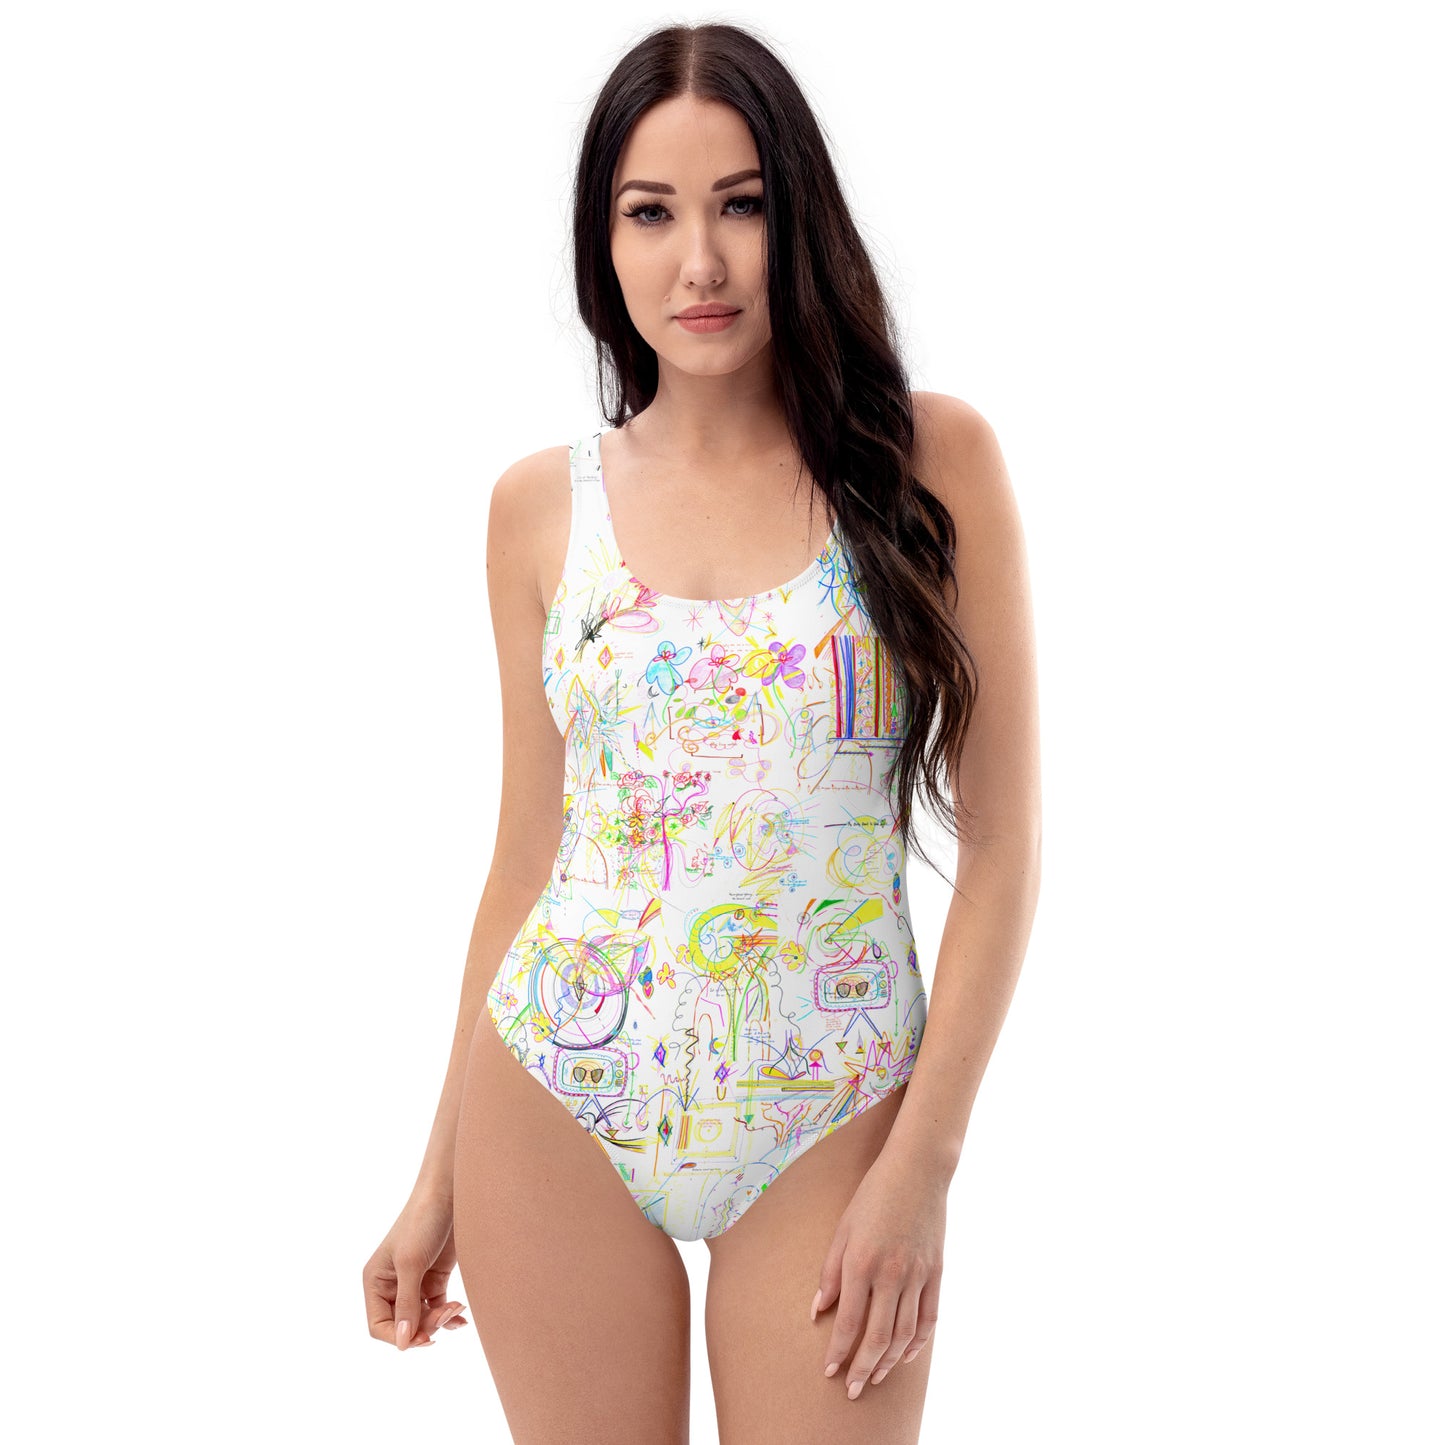 the day she remembered HER POWER, one-piece swimsuit in white